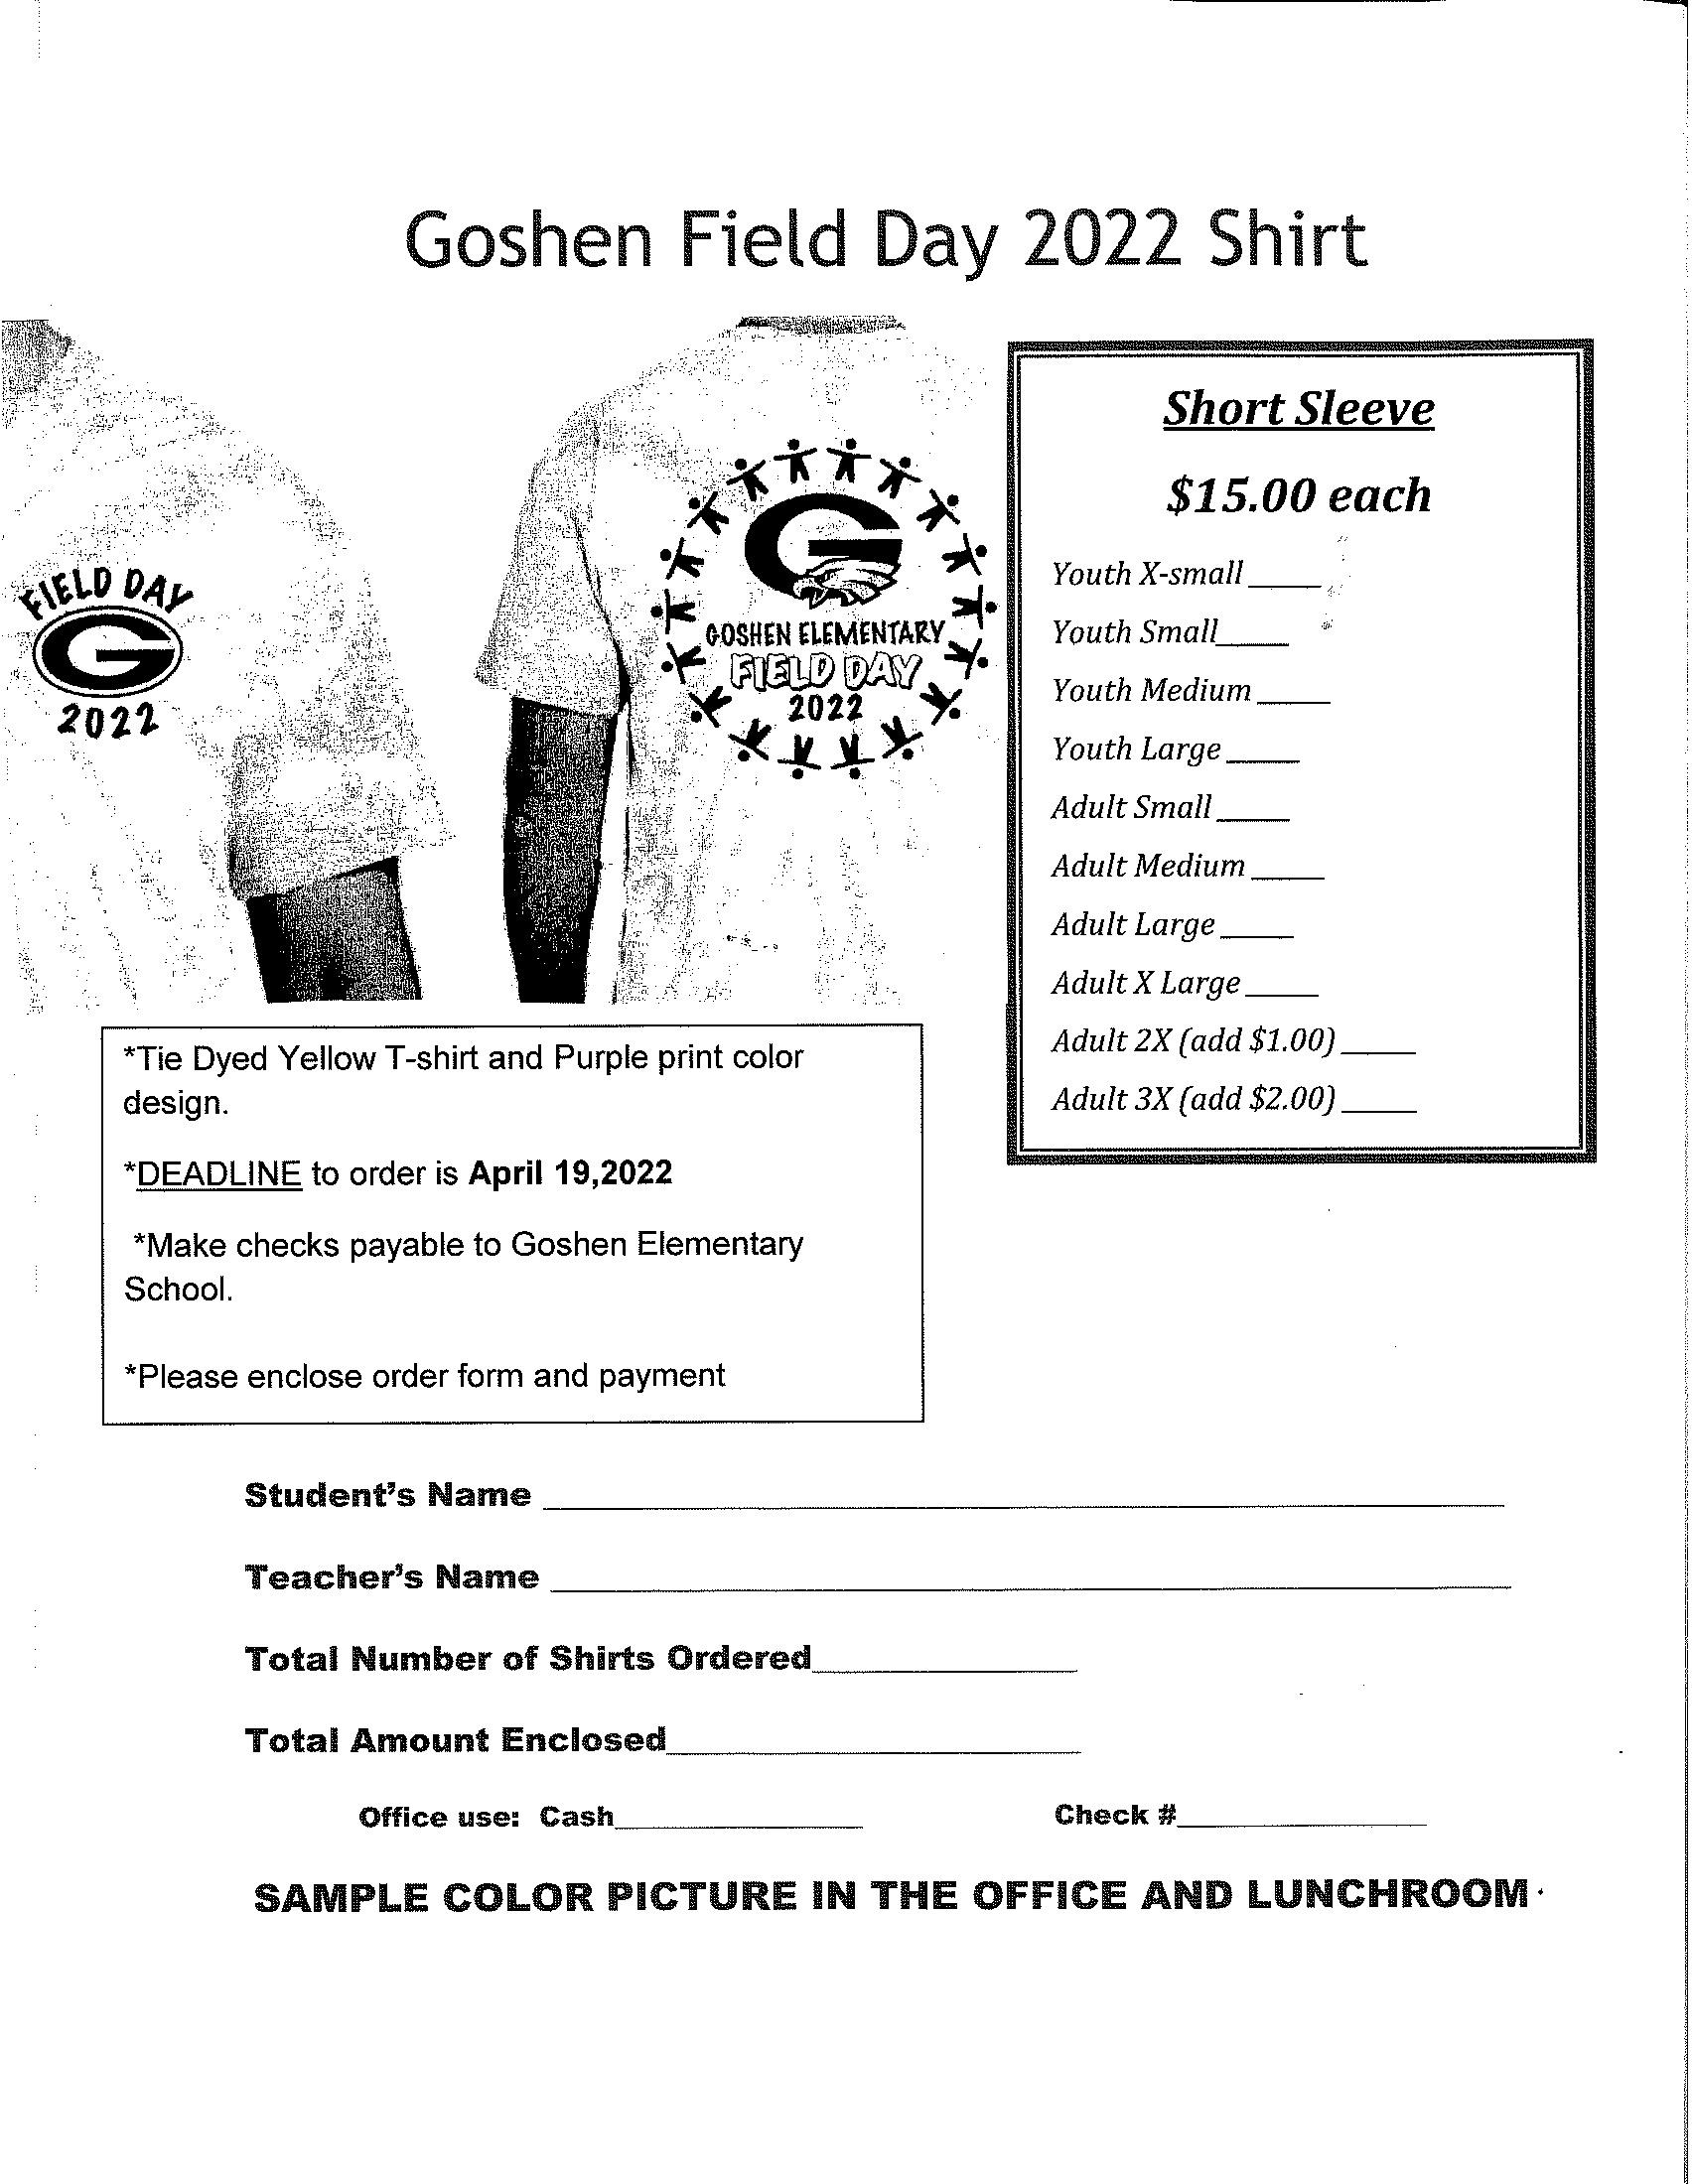 GES field day order form